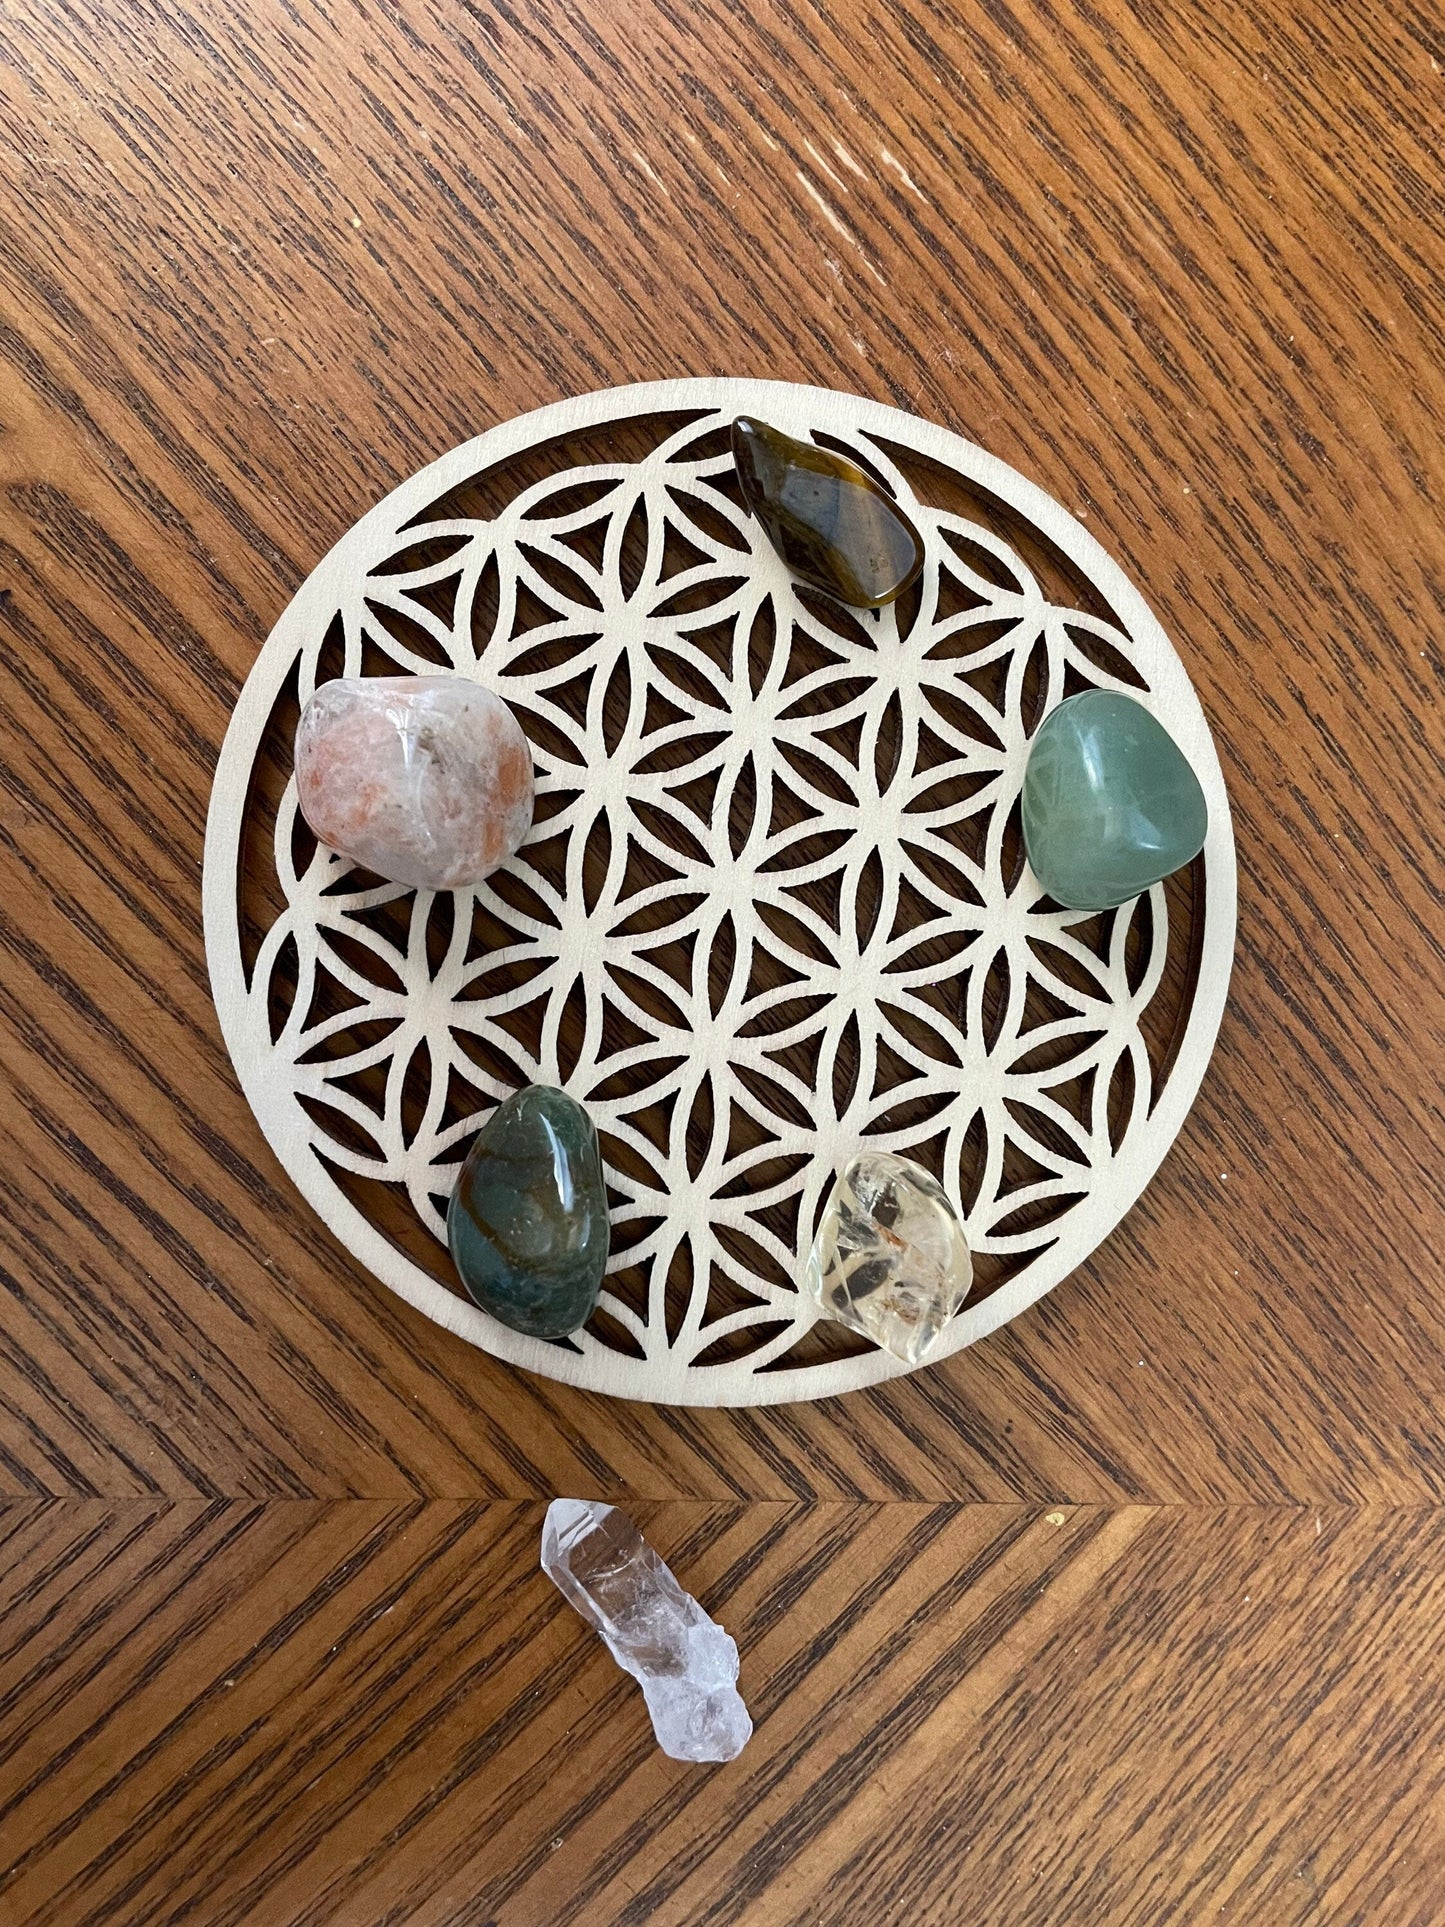 7 piece Prosperity Empowerment crystal set with Flower of Life